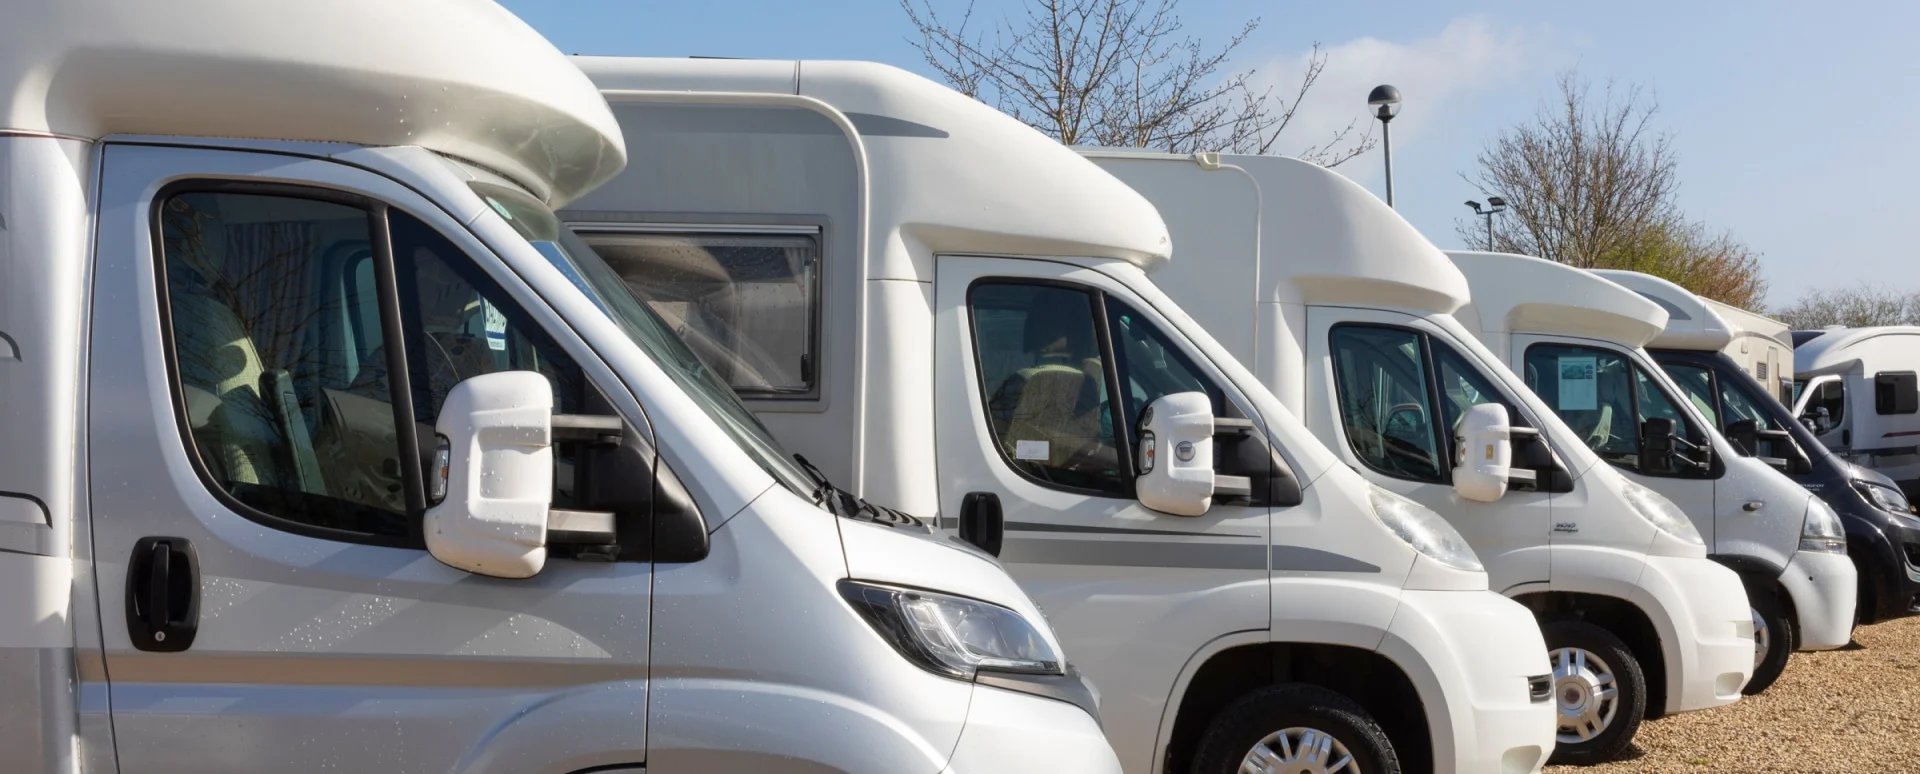 Somerset Motorhome Centre vehicles on the forecourt